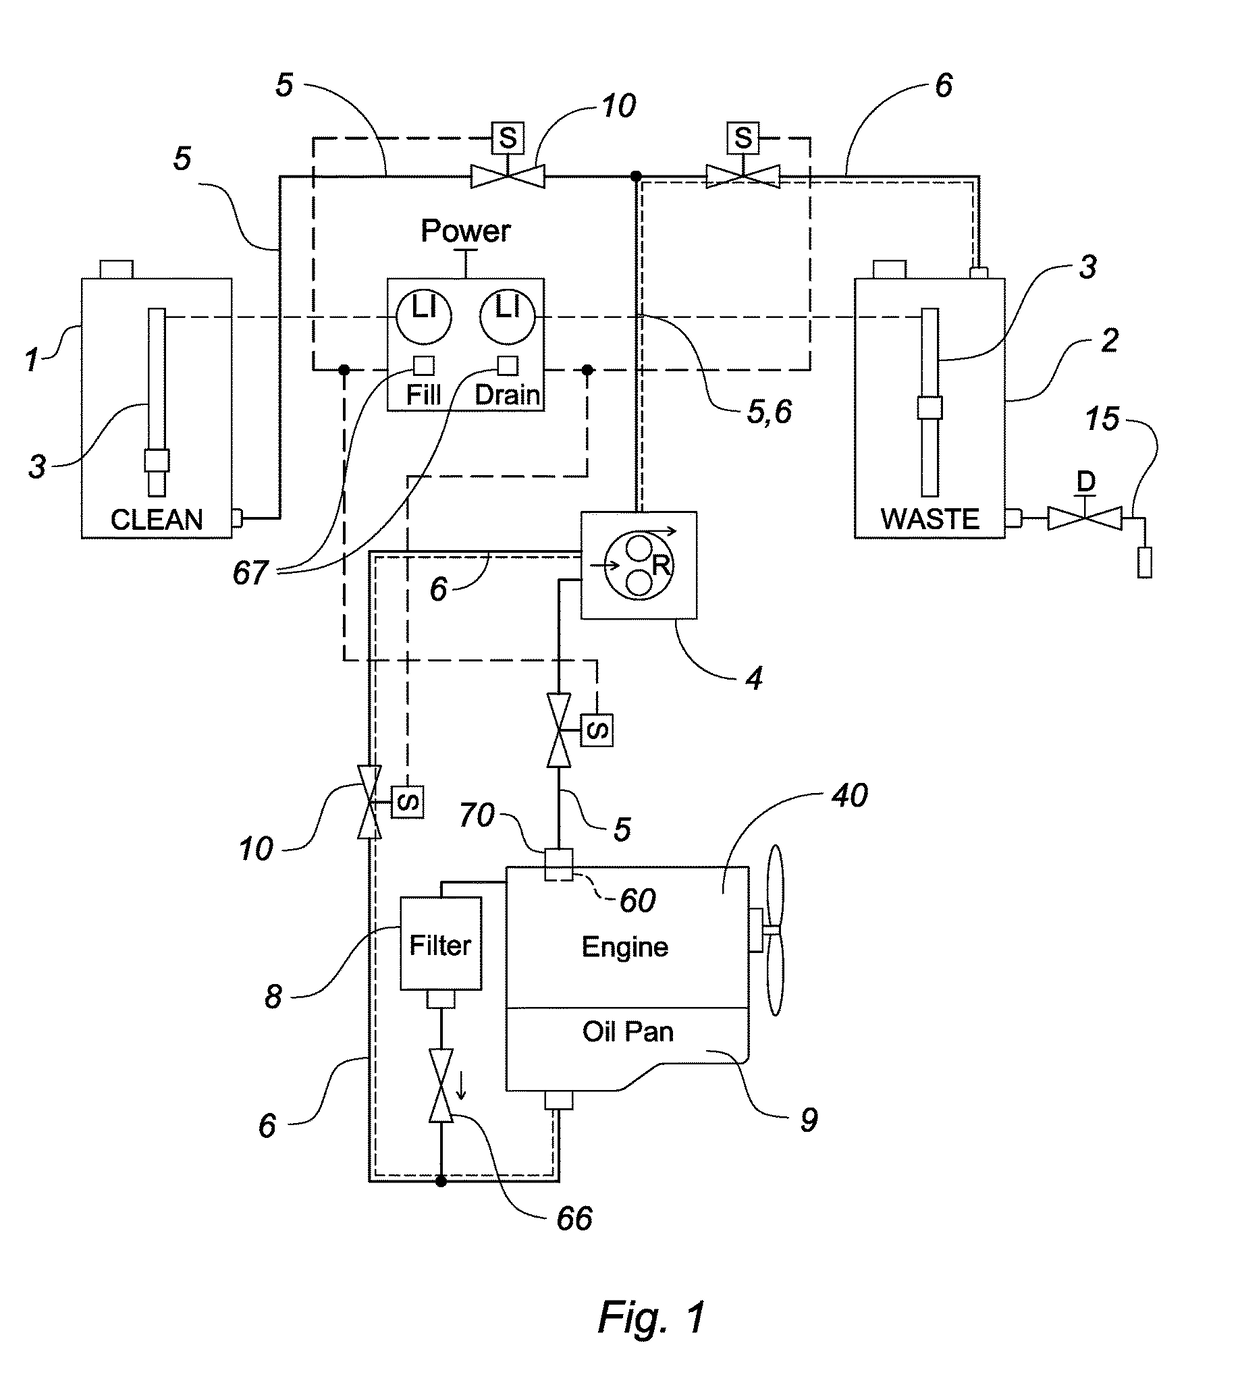 Closed-loop oil-transfer system for a vehicle